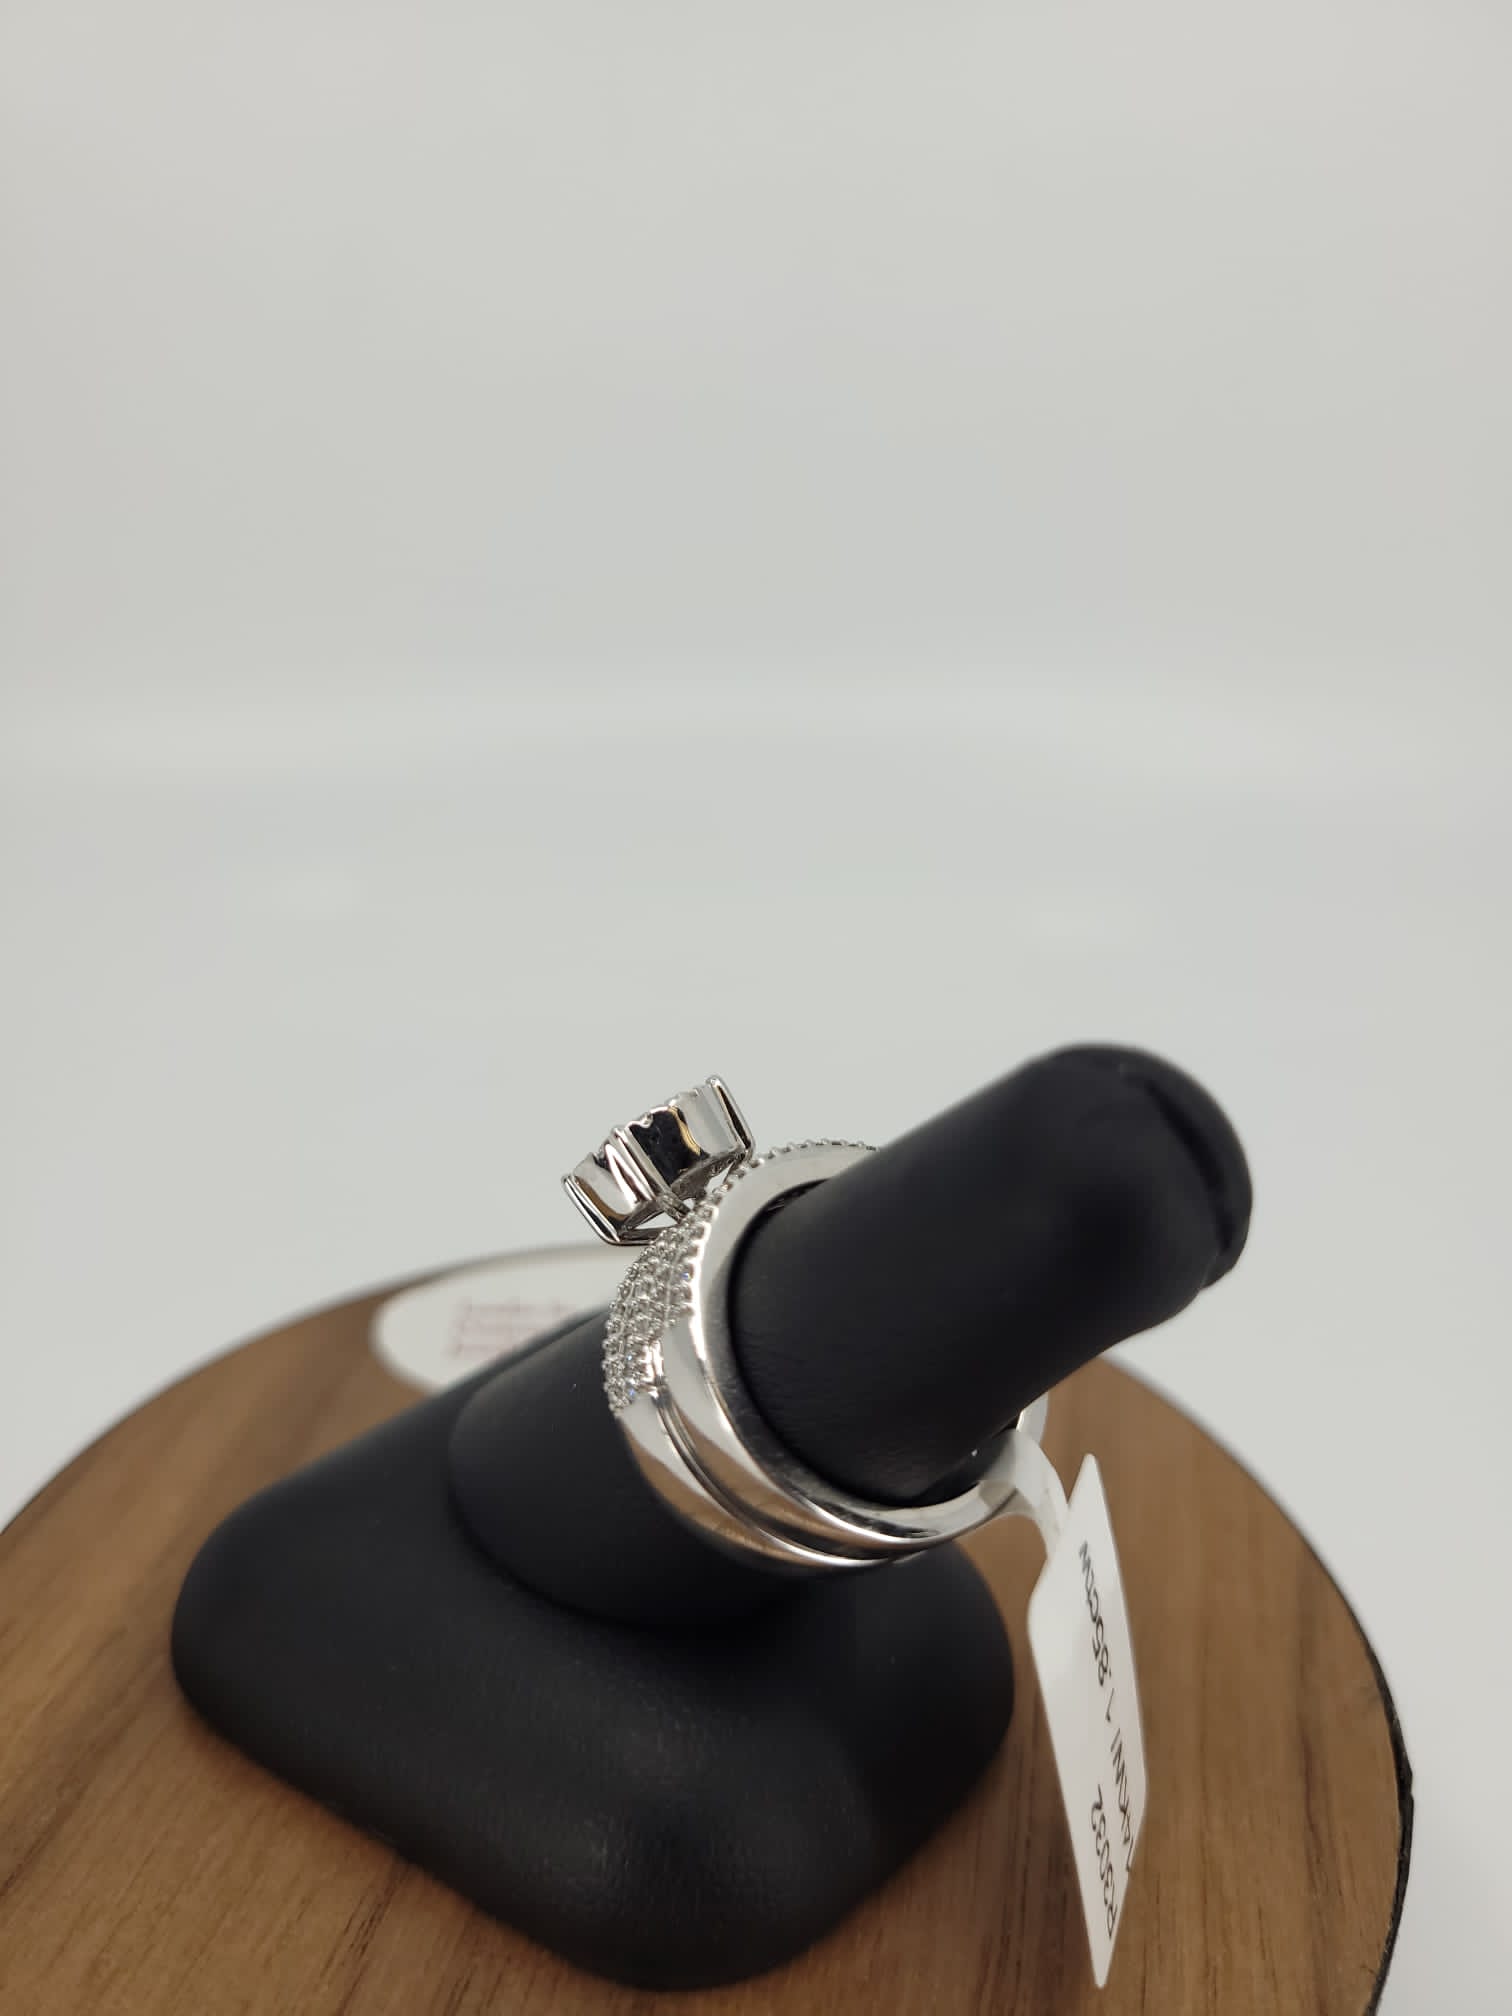 14K White Gold Cluster Setting Engagement Ring with .25 Carat Diamond Center Stone on an Invisible Halo Setting